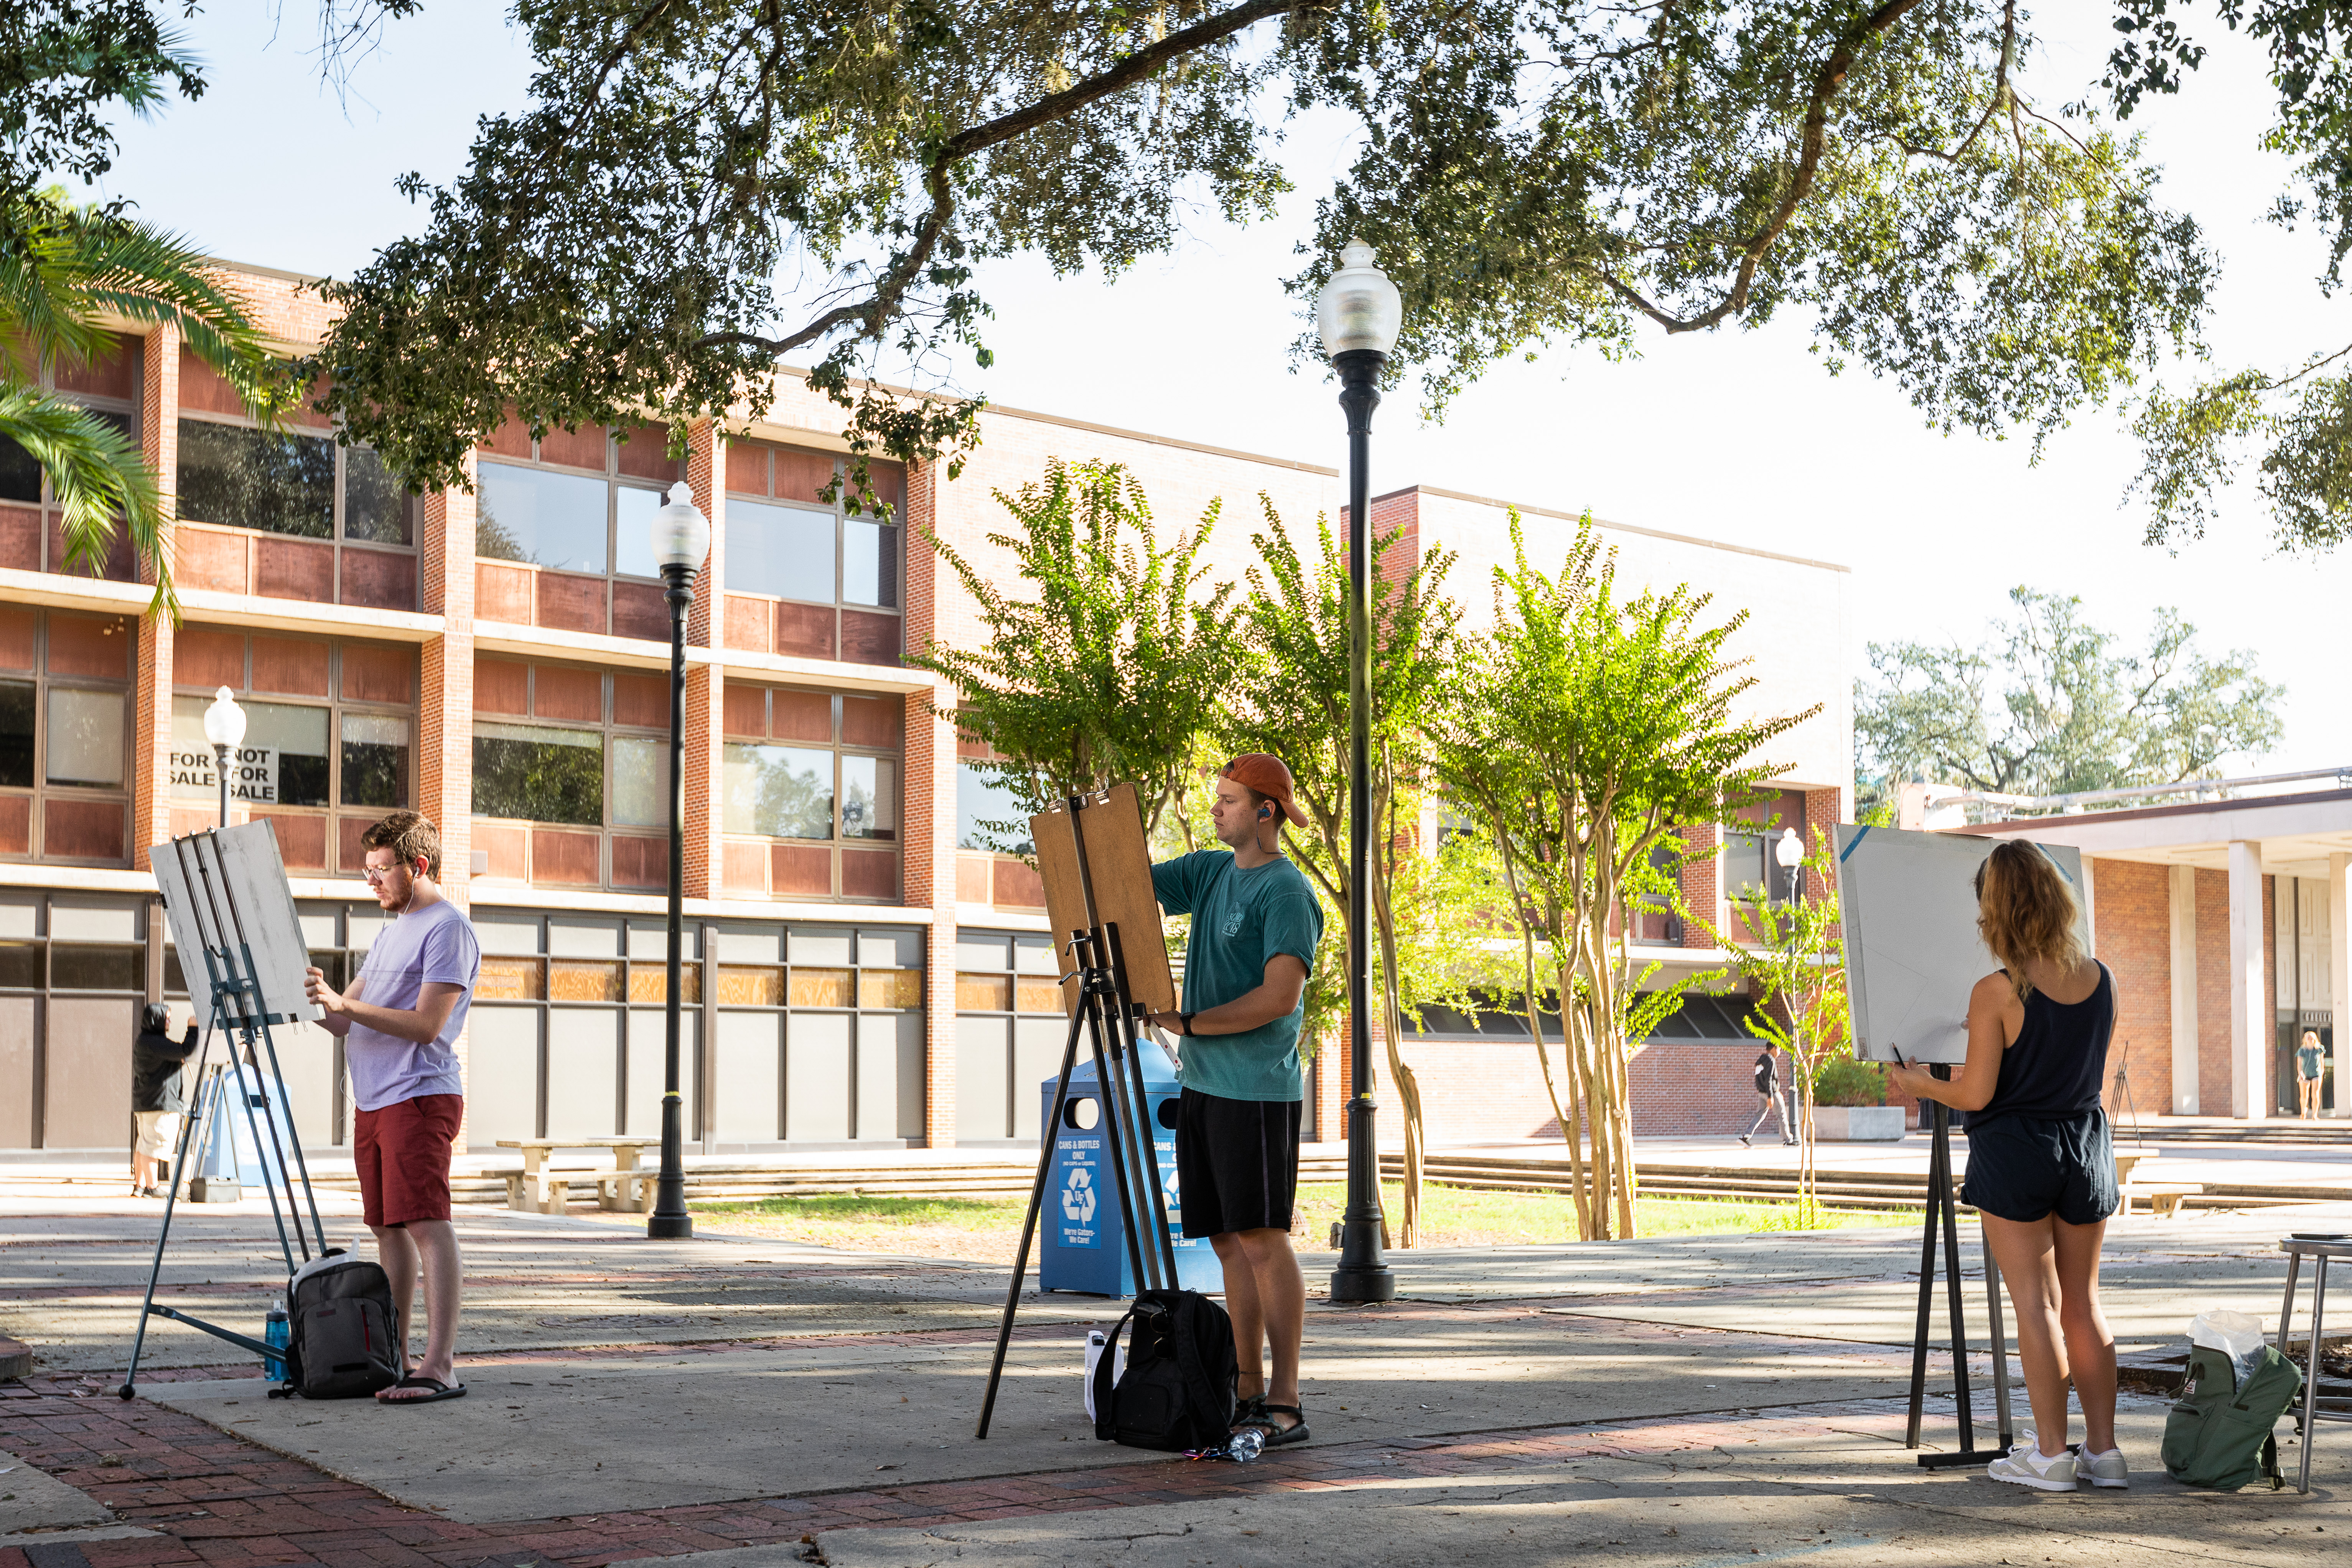 University of Florida College of the Arts students enjoying their perceptual drawing course outdoors on campus.